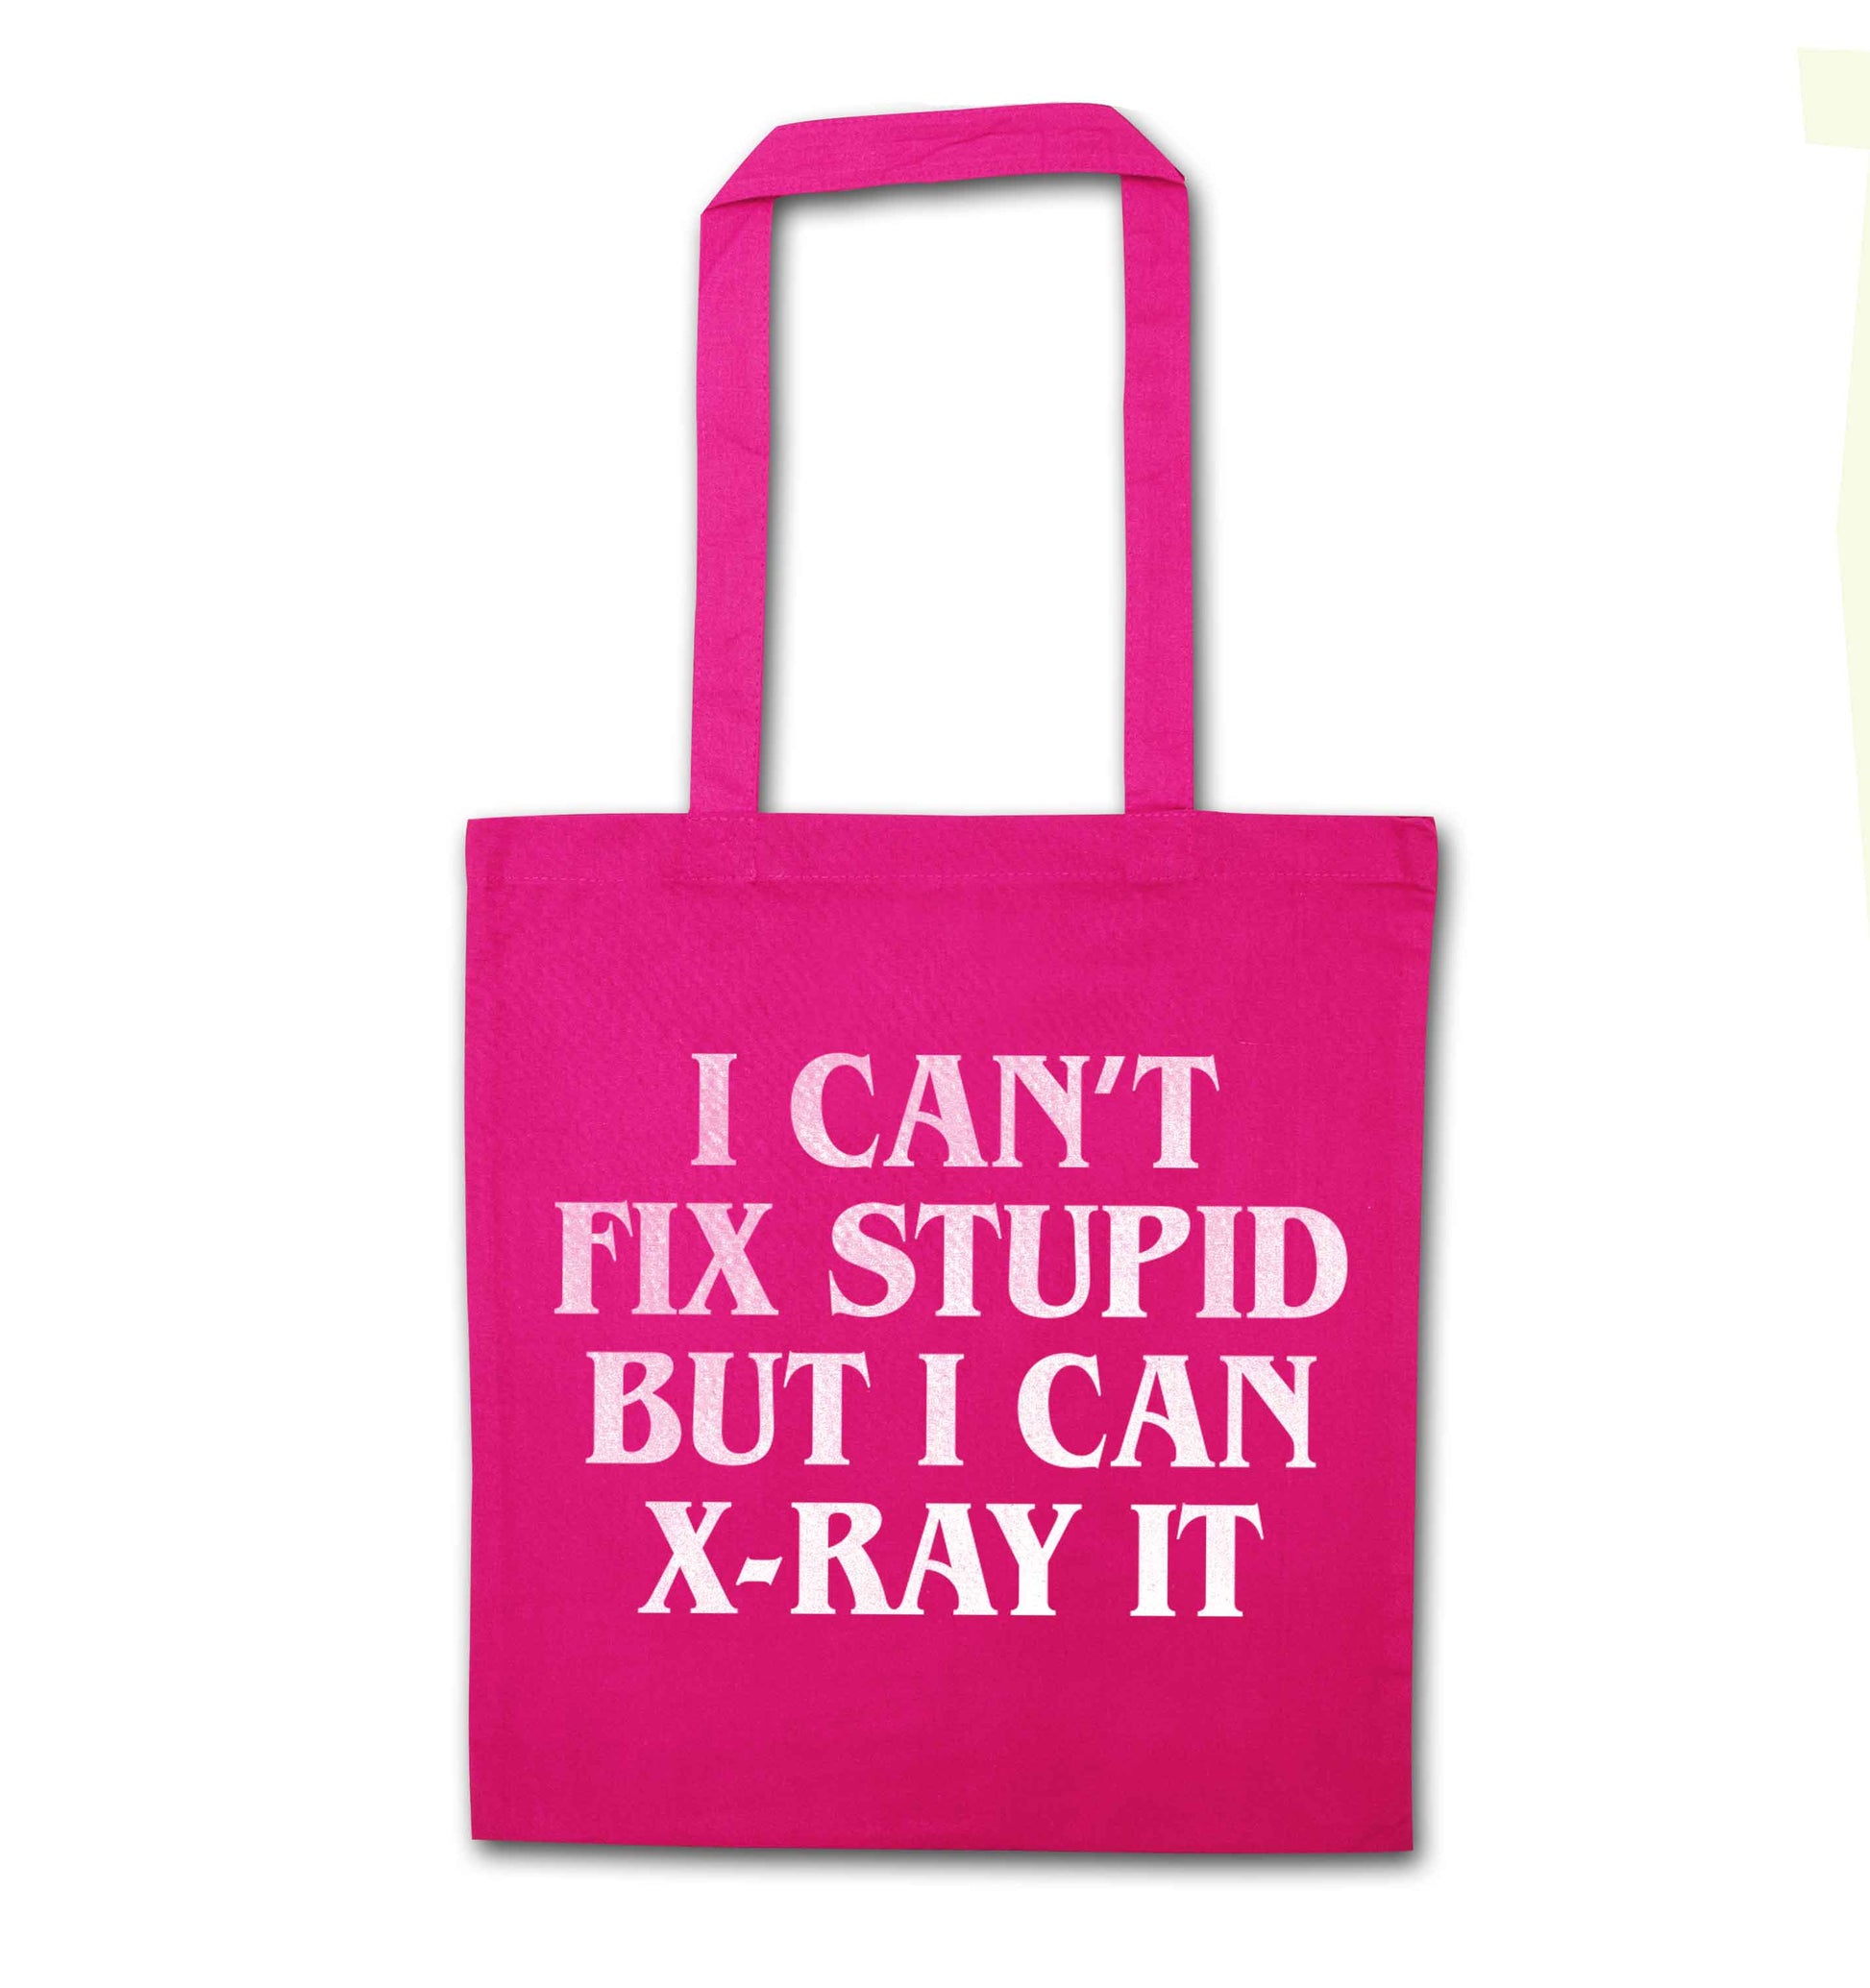 I can't fix stupid but I can X-Ray it pink tote bag